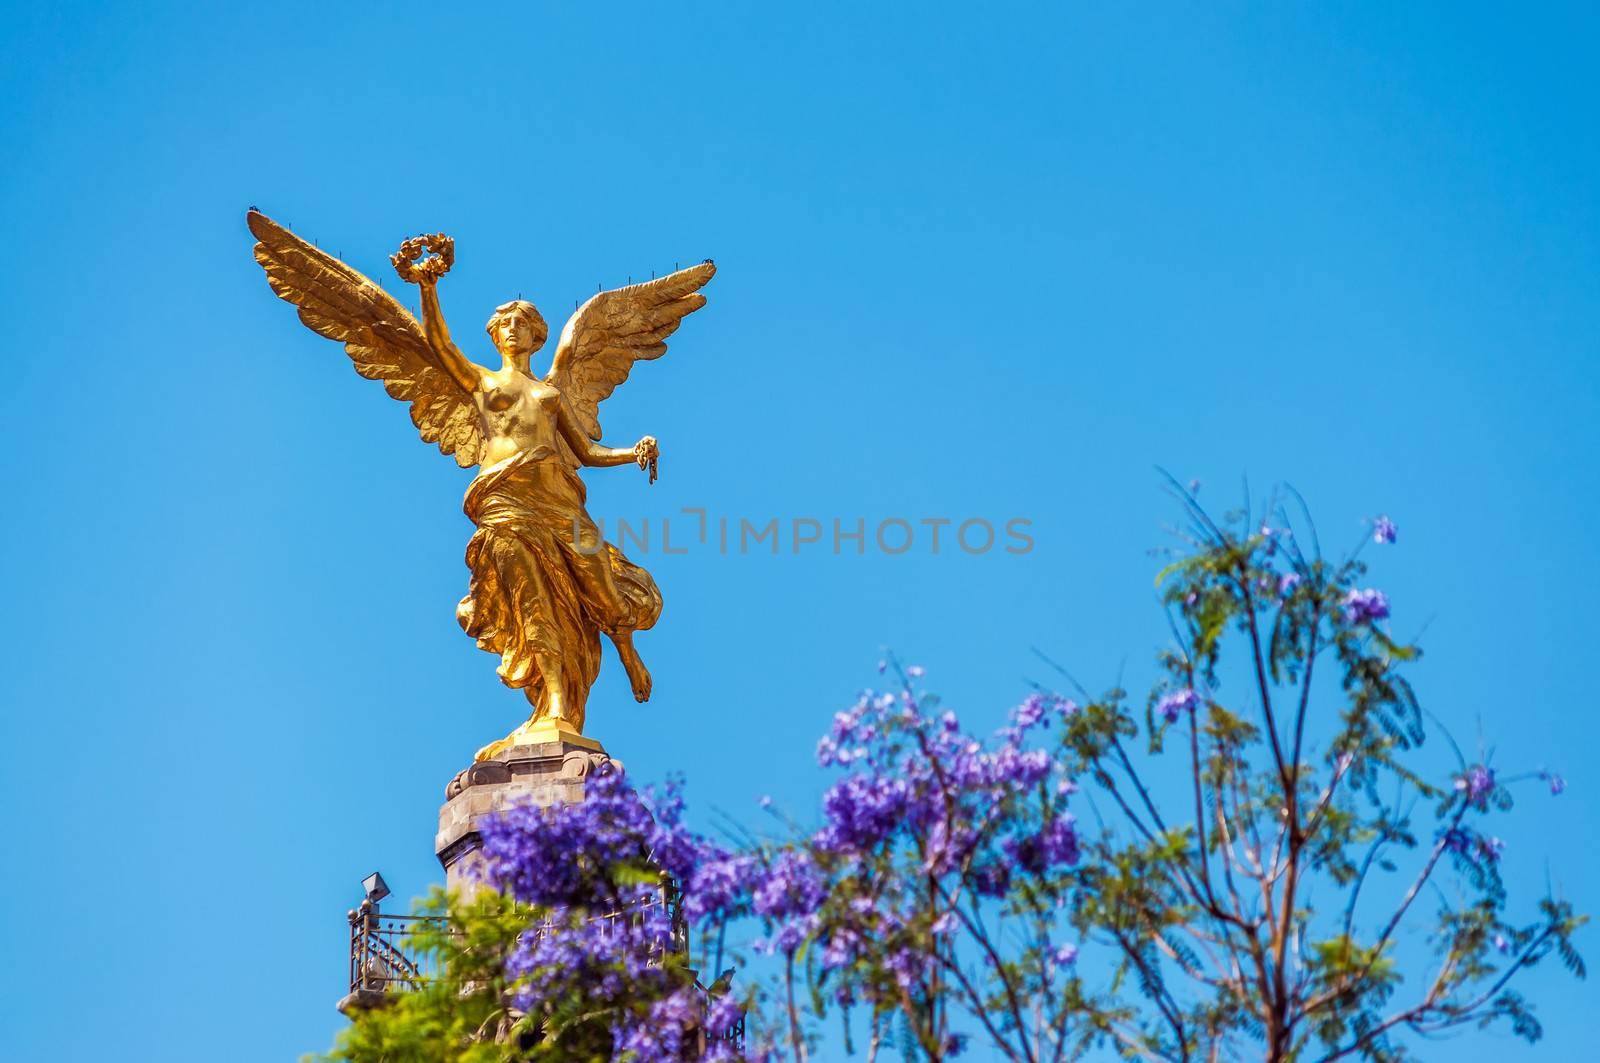 Angel of Independence by jkraft5